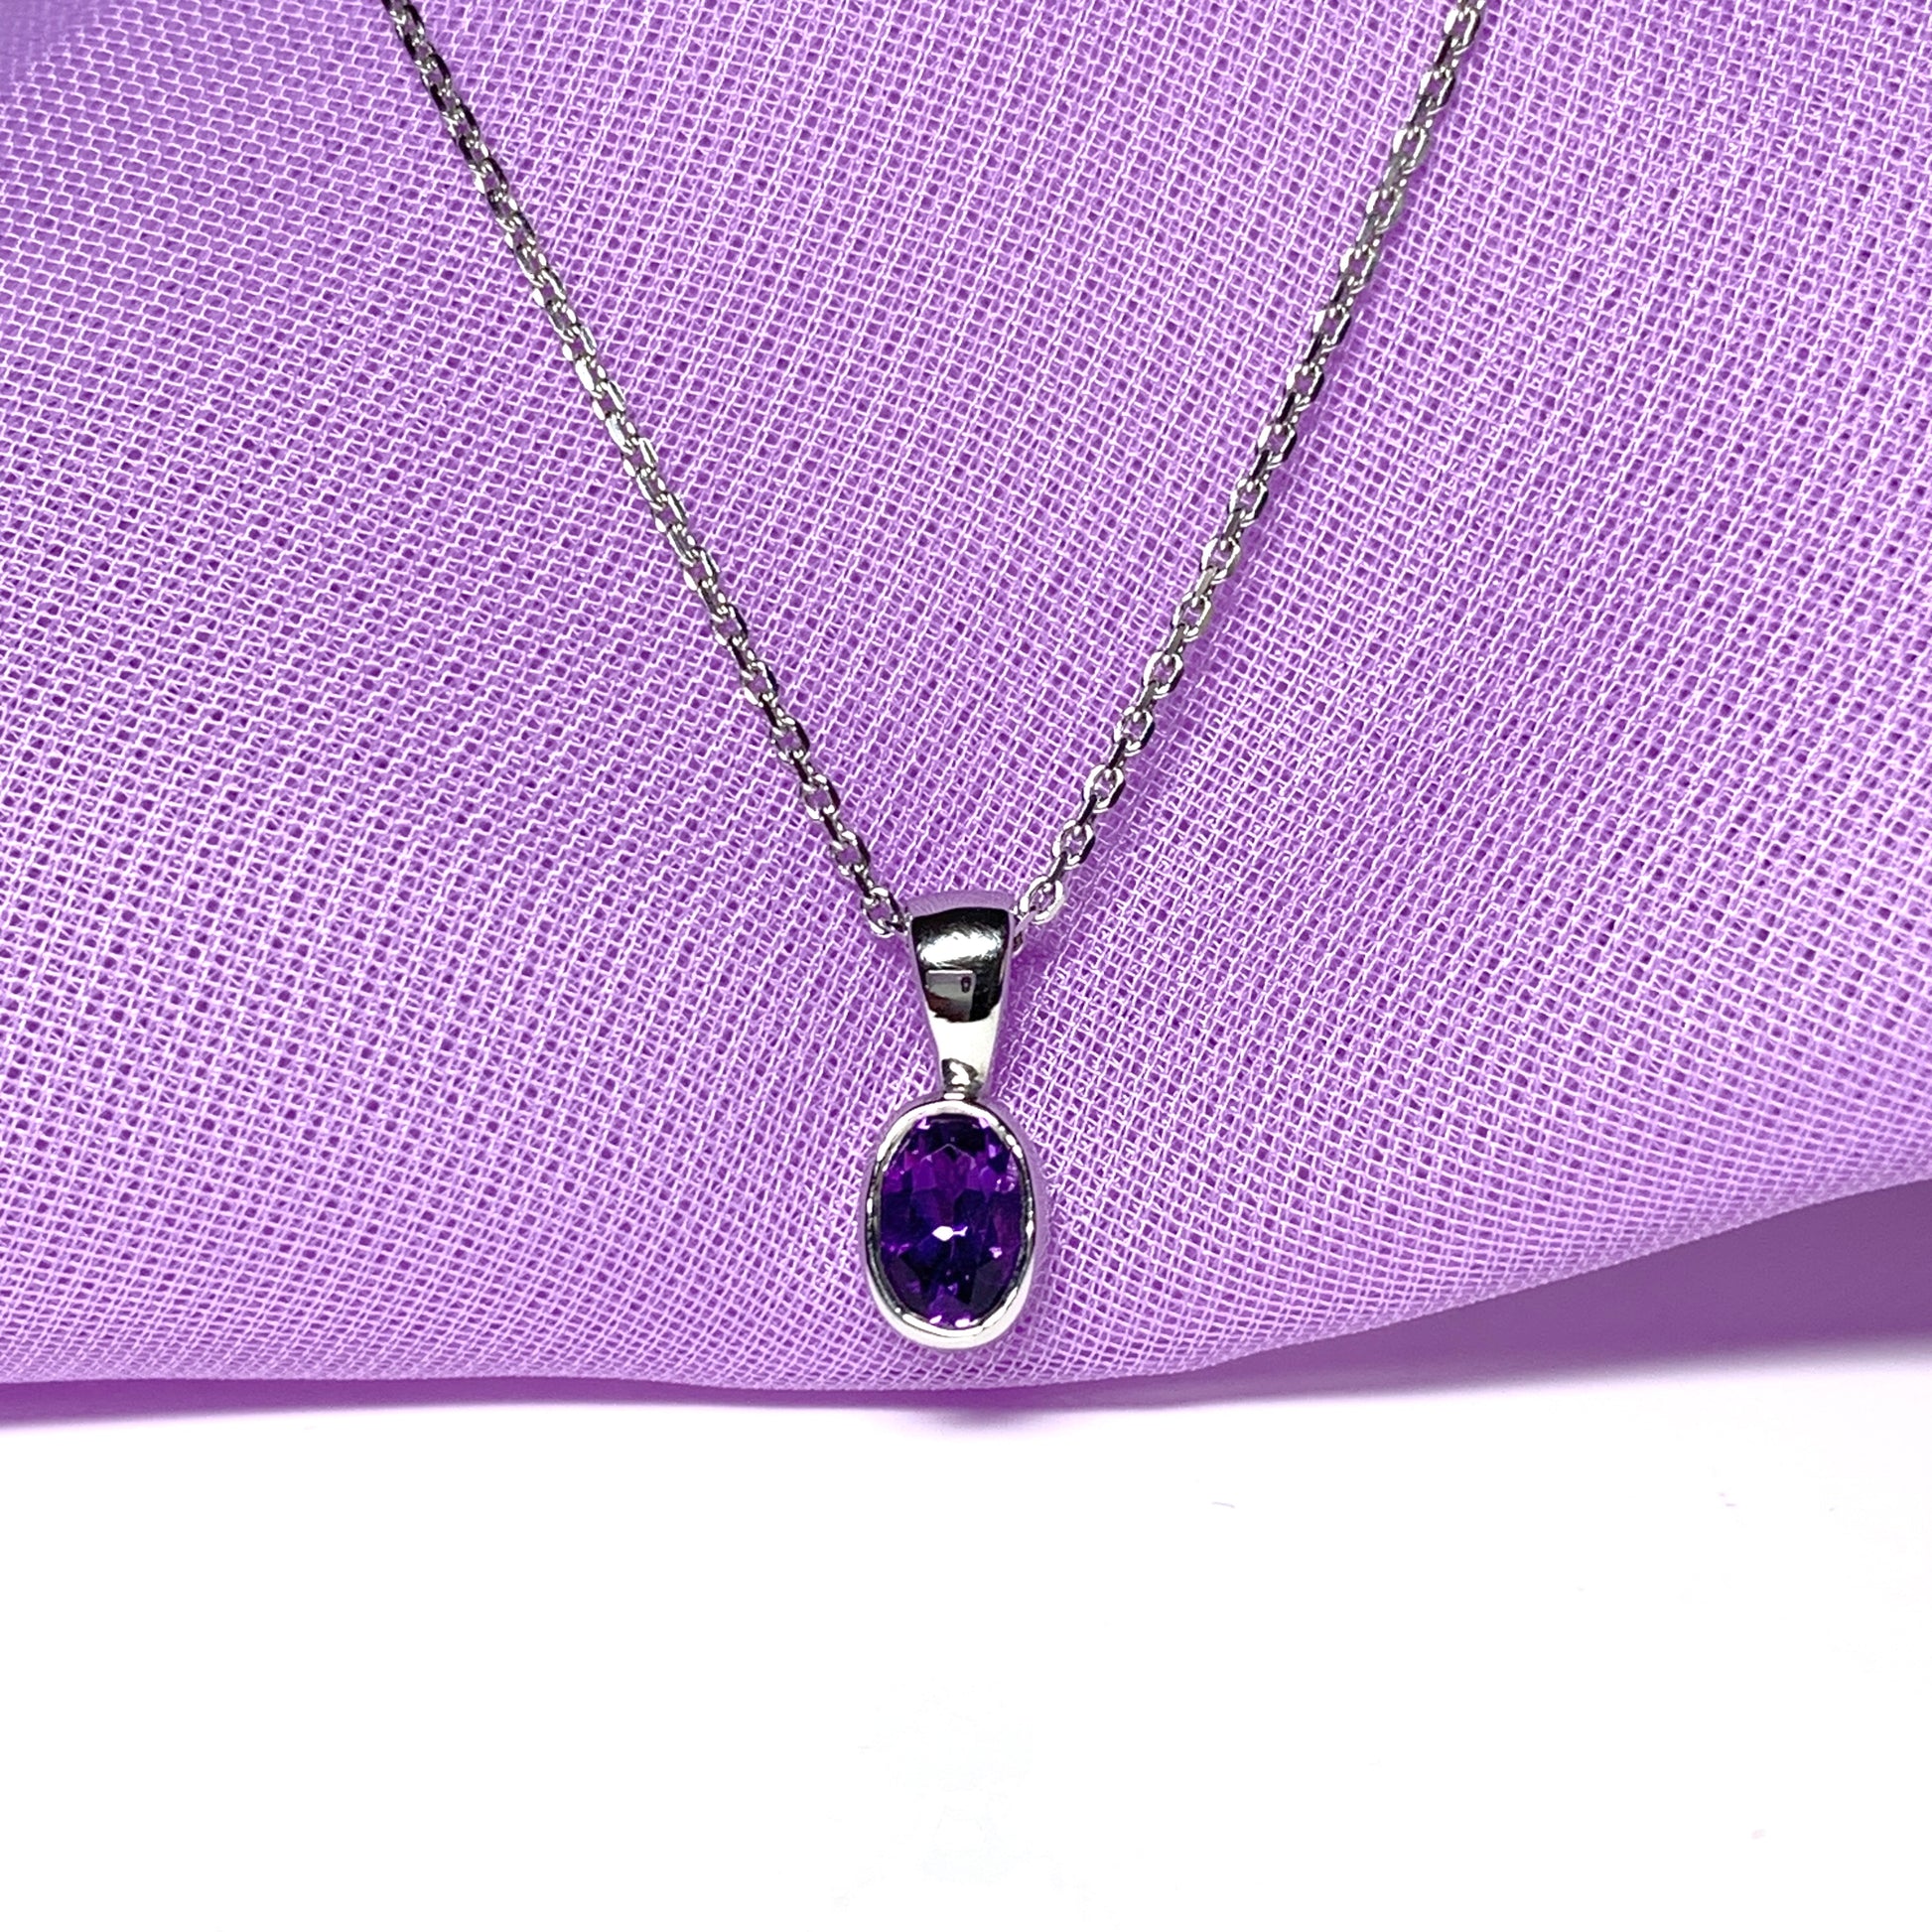 Oval purple amethyst white gold rubbed over necklace